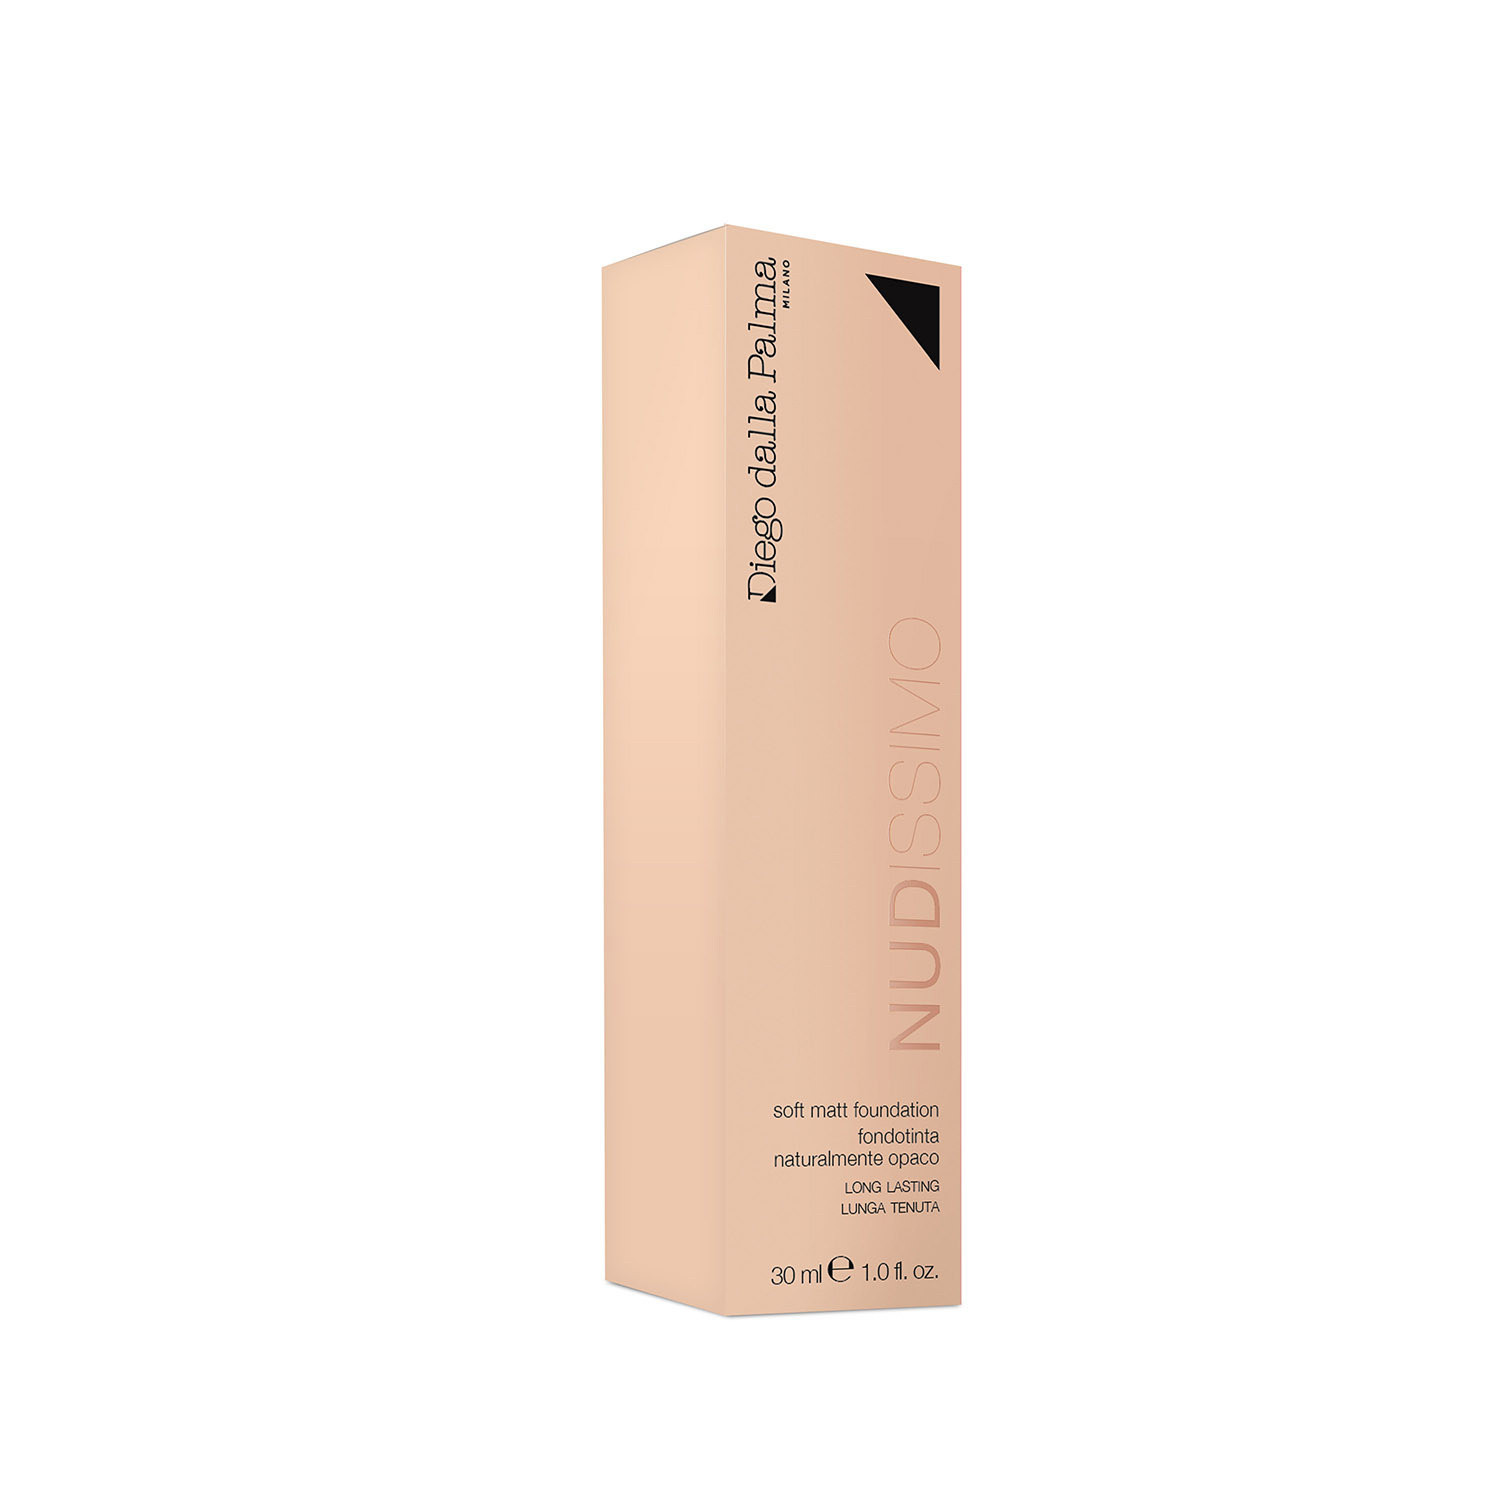 NUDISSIMO Naturally Matte Foundation - 248W, Copper Brown, large image number 2